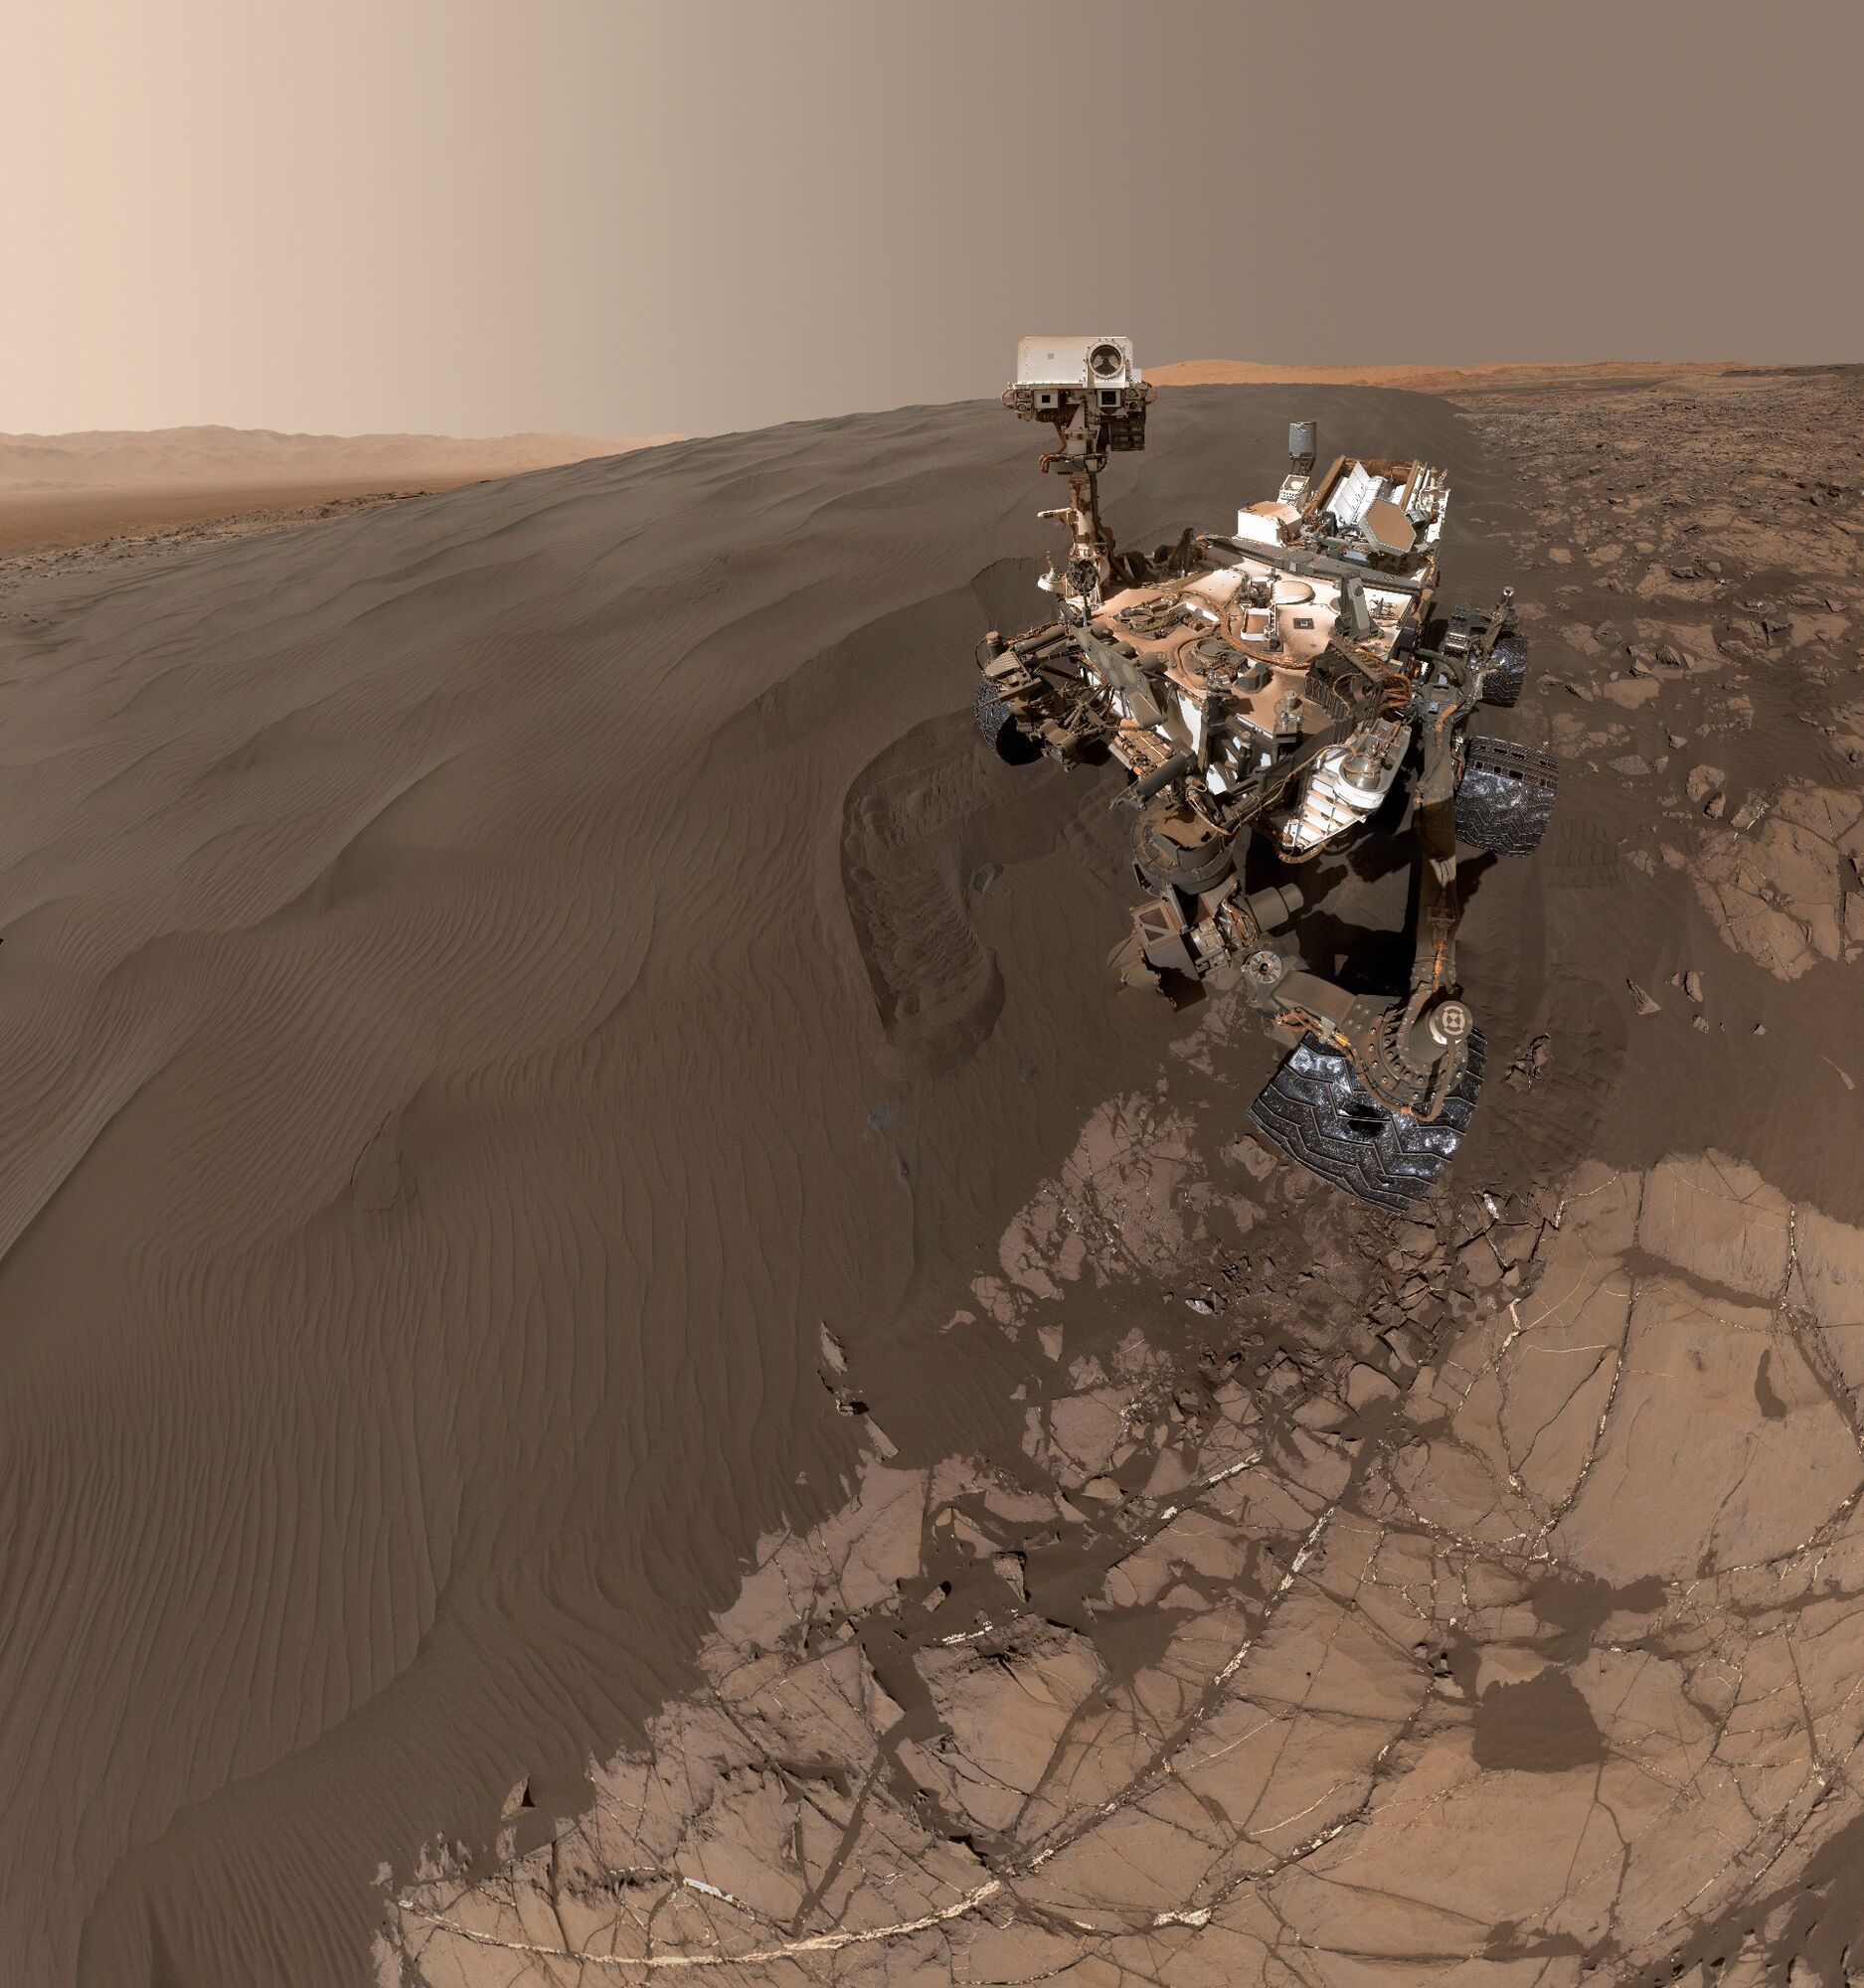 Curiosity rover taking picture of itself on Mars sand dunes